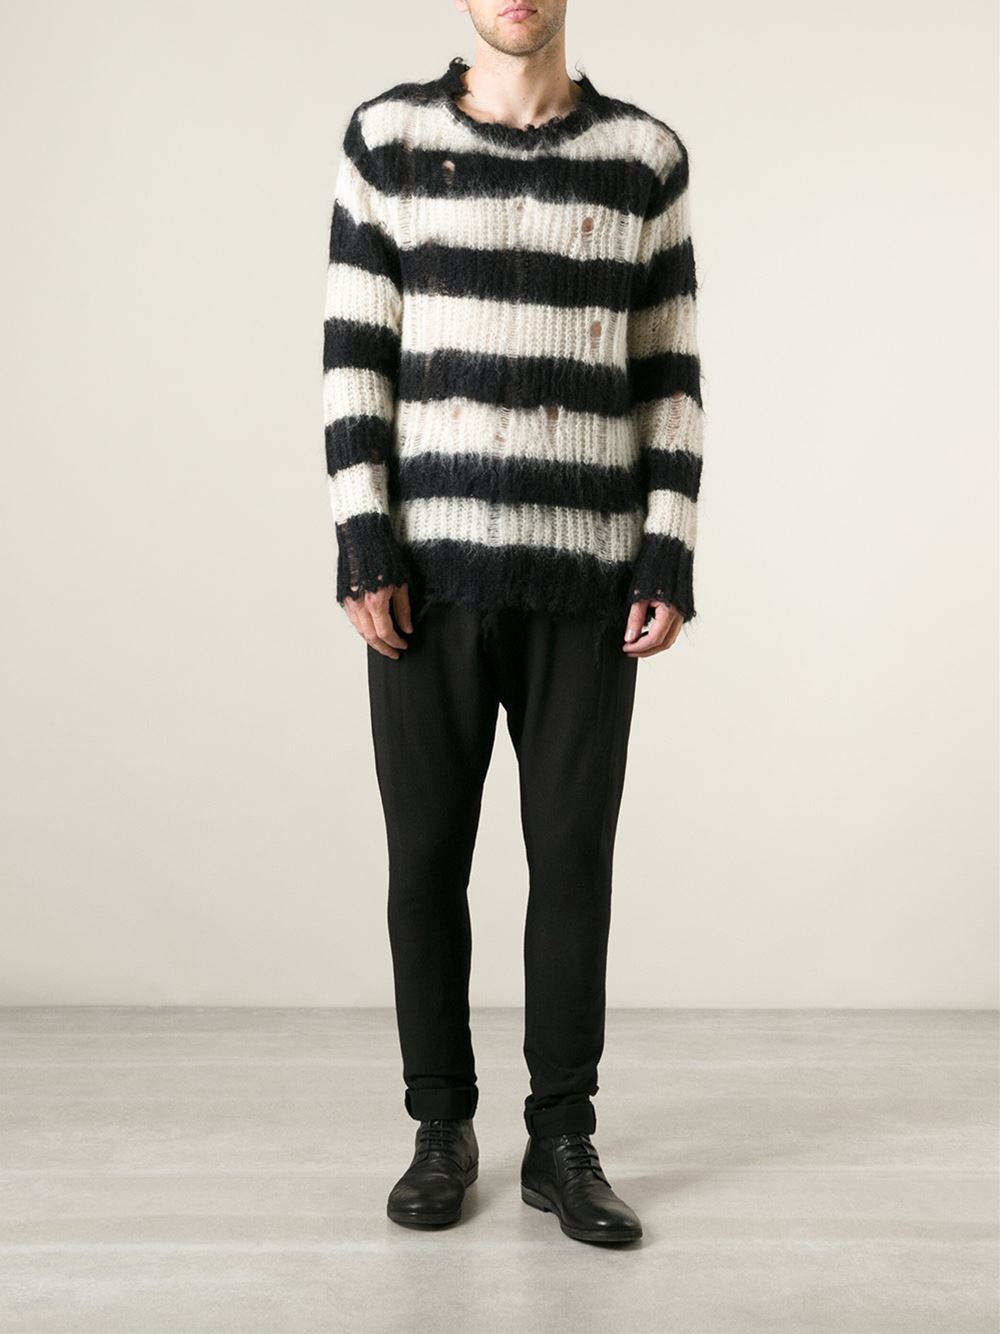 Junya Watanabe Striped Distressed Knit Sweater in Black for Men - Lyst